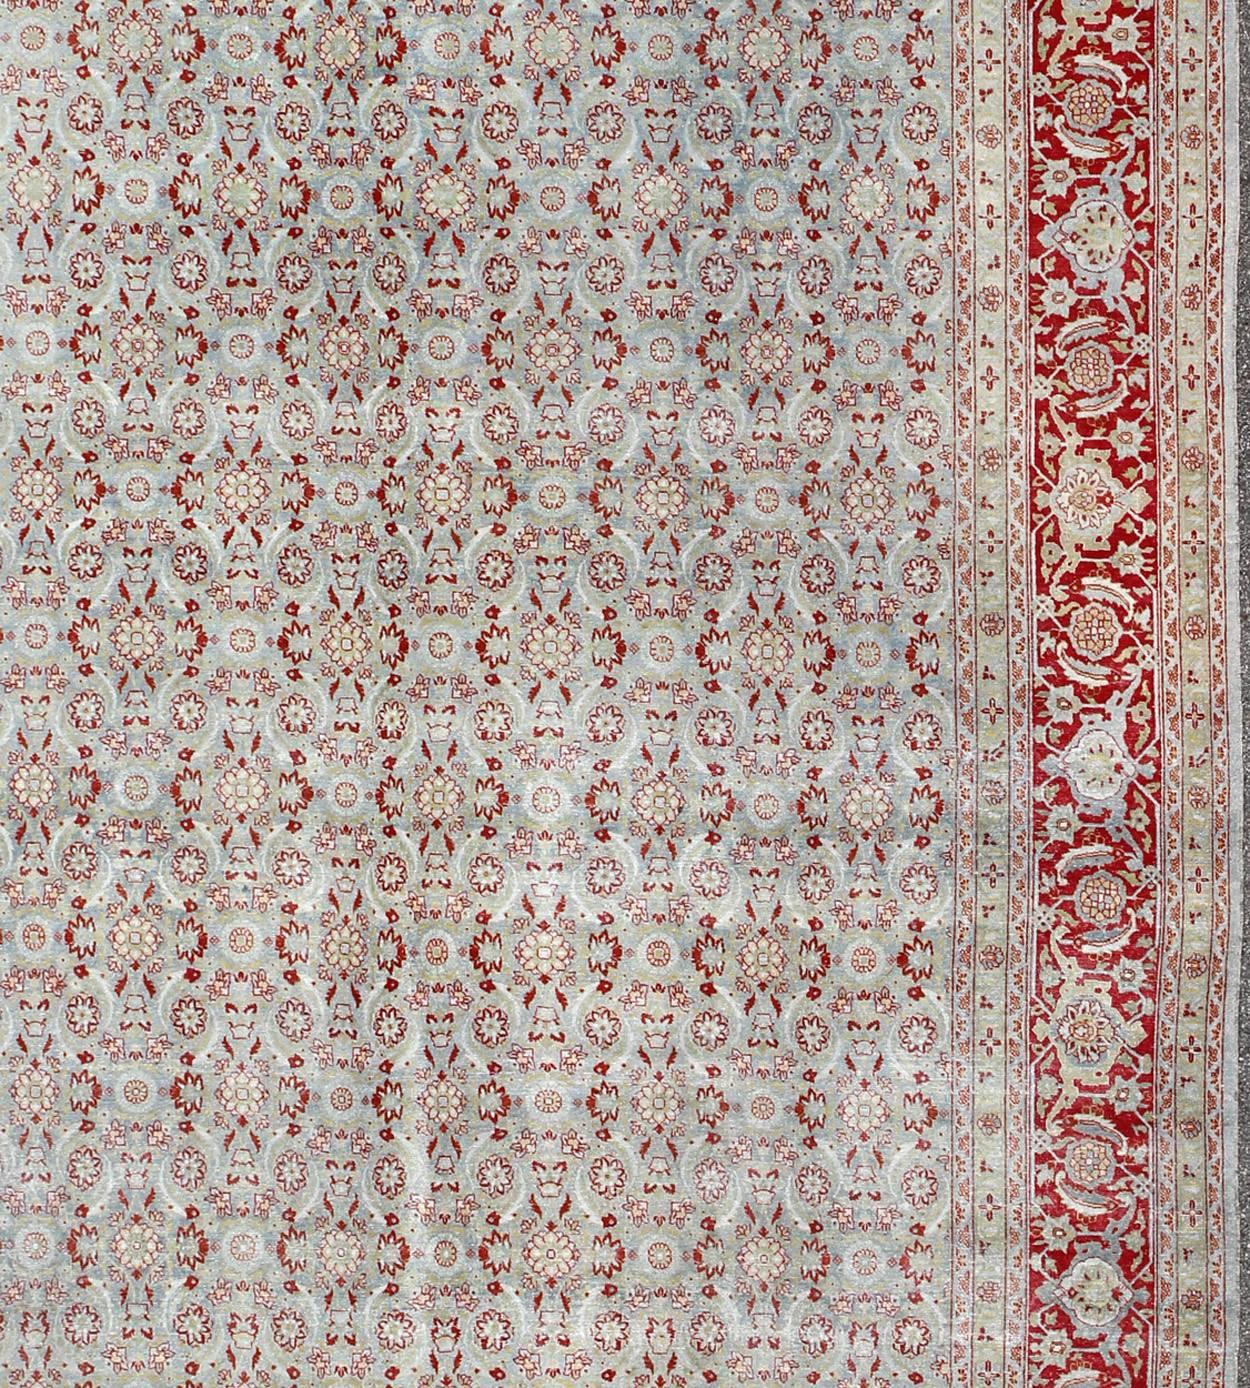 All-Over Floral Design Antique Persian Tabriz Rug in Shades of Gray-Blue and Red In Good Condition For Sale In Atlanta, GA